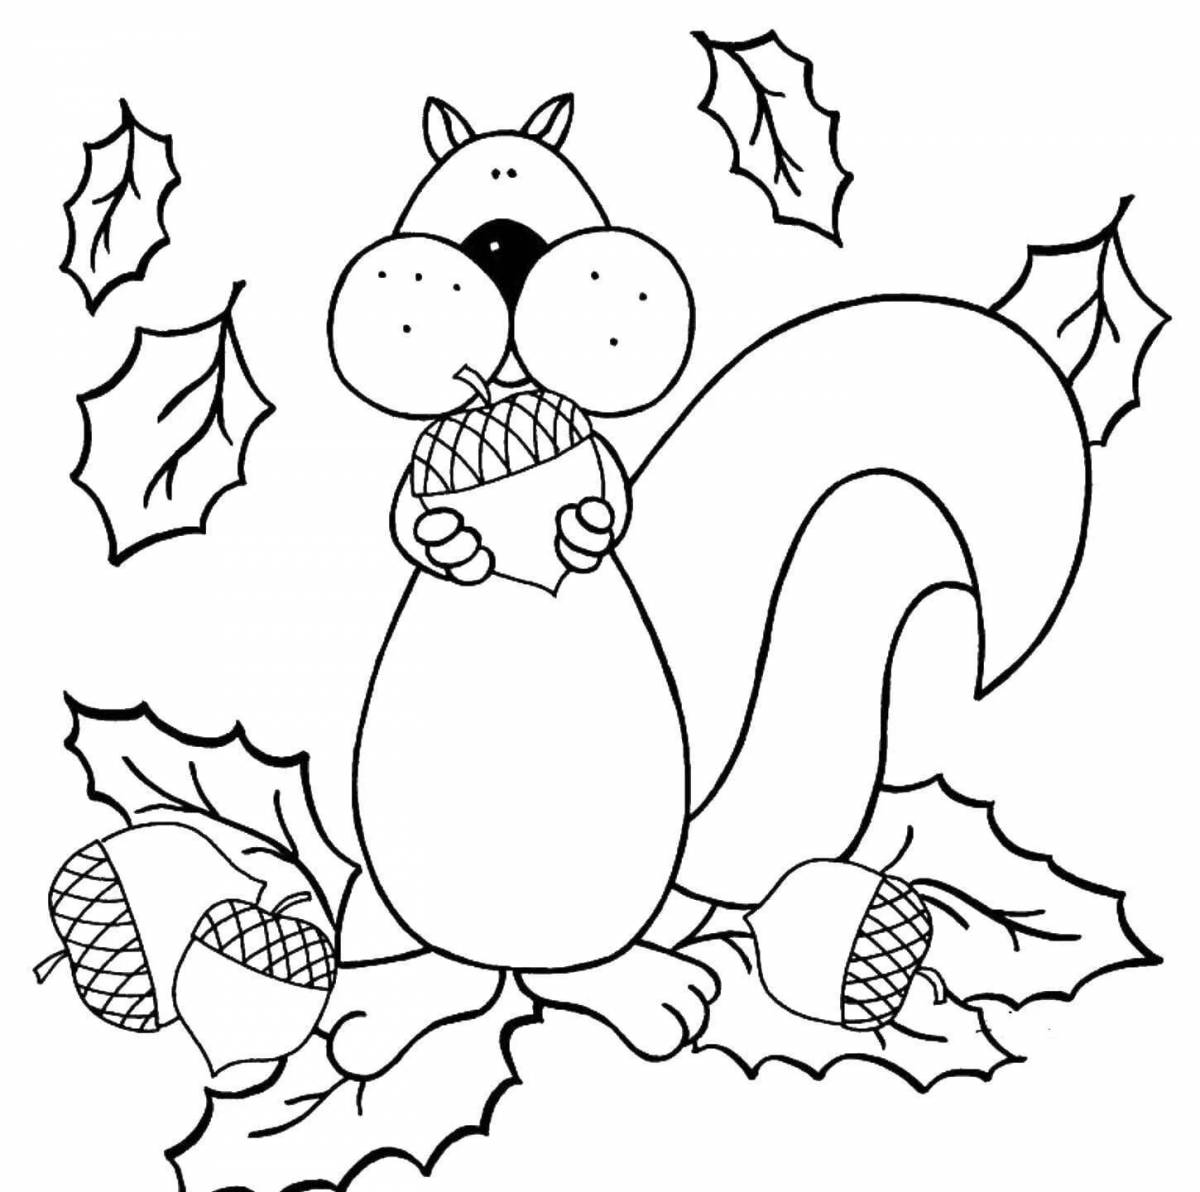 Squirrel coloring book for children 6-7 years old